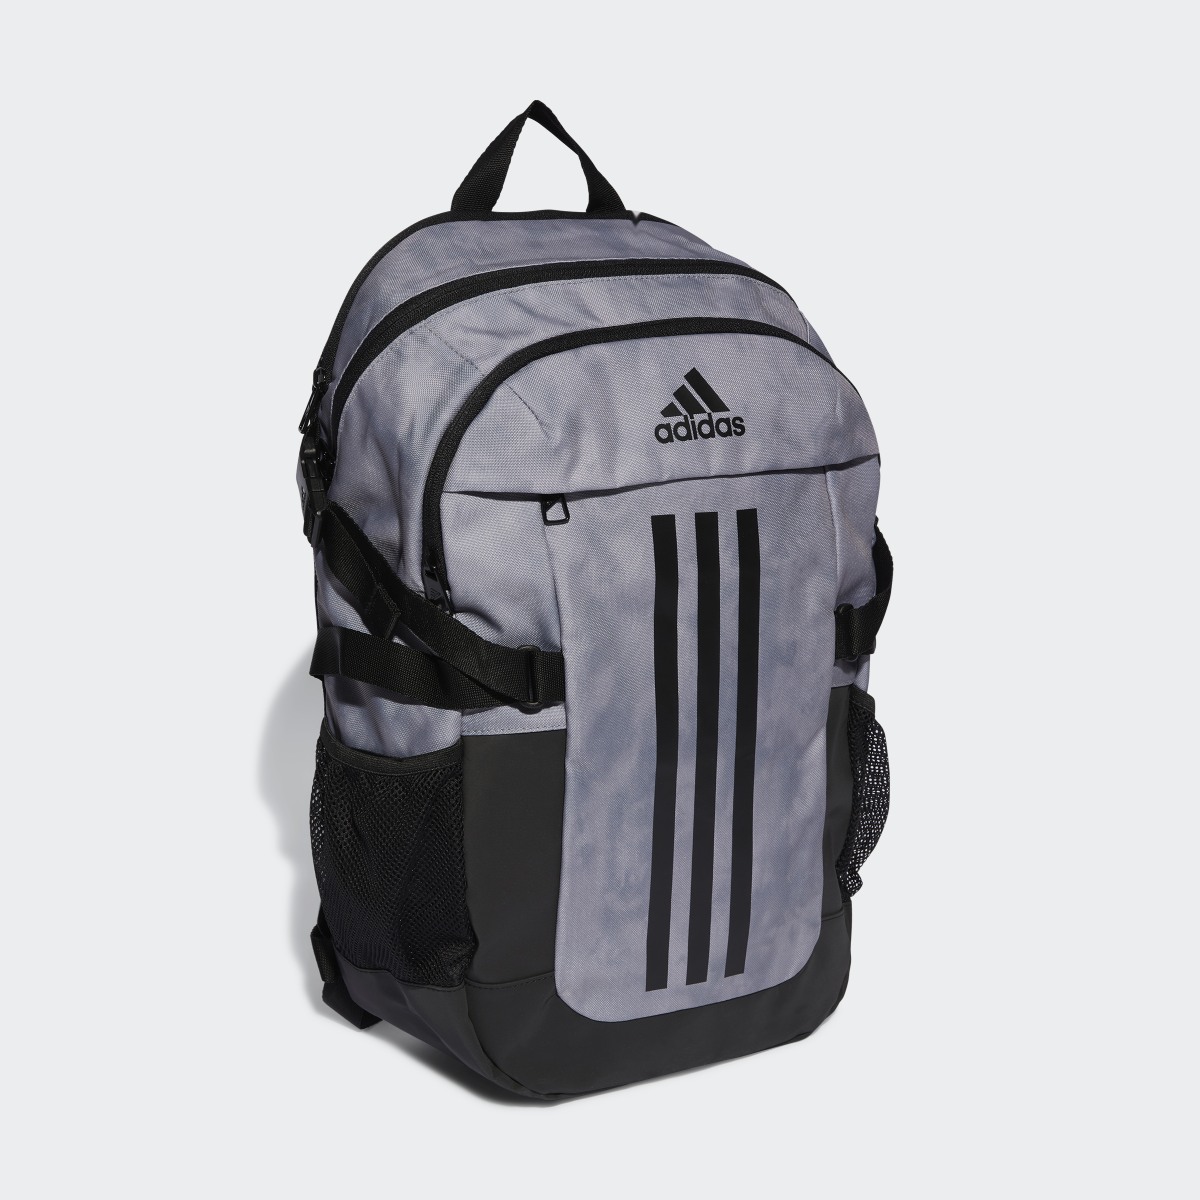 Adidas Power 6 Graphic Backpack. 4